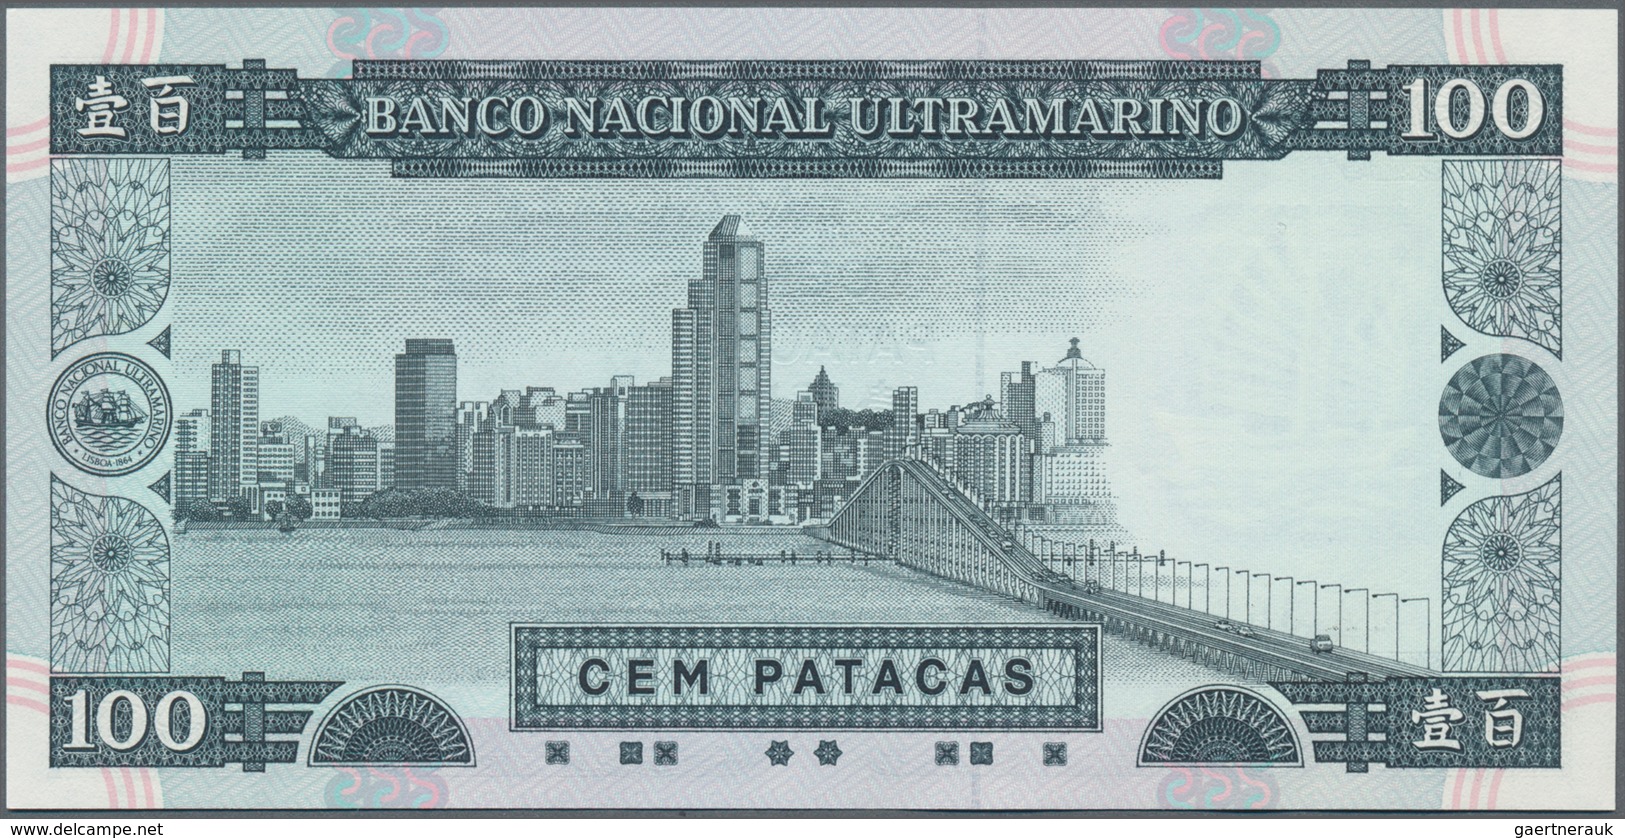 Macau / Macao: Original folder by the Banco Nacional Ultramarino for the issue of the new banknote s